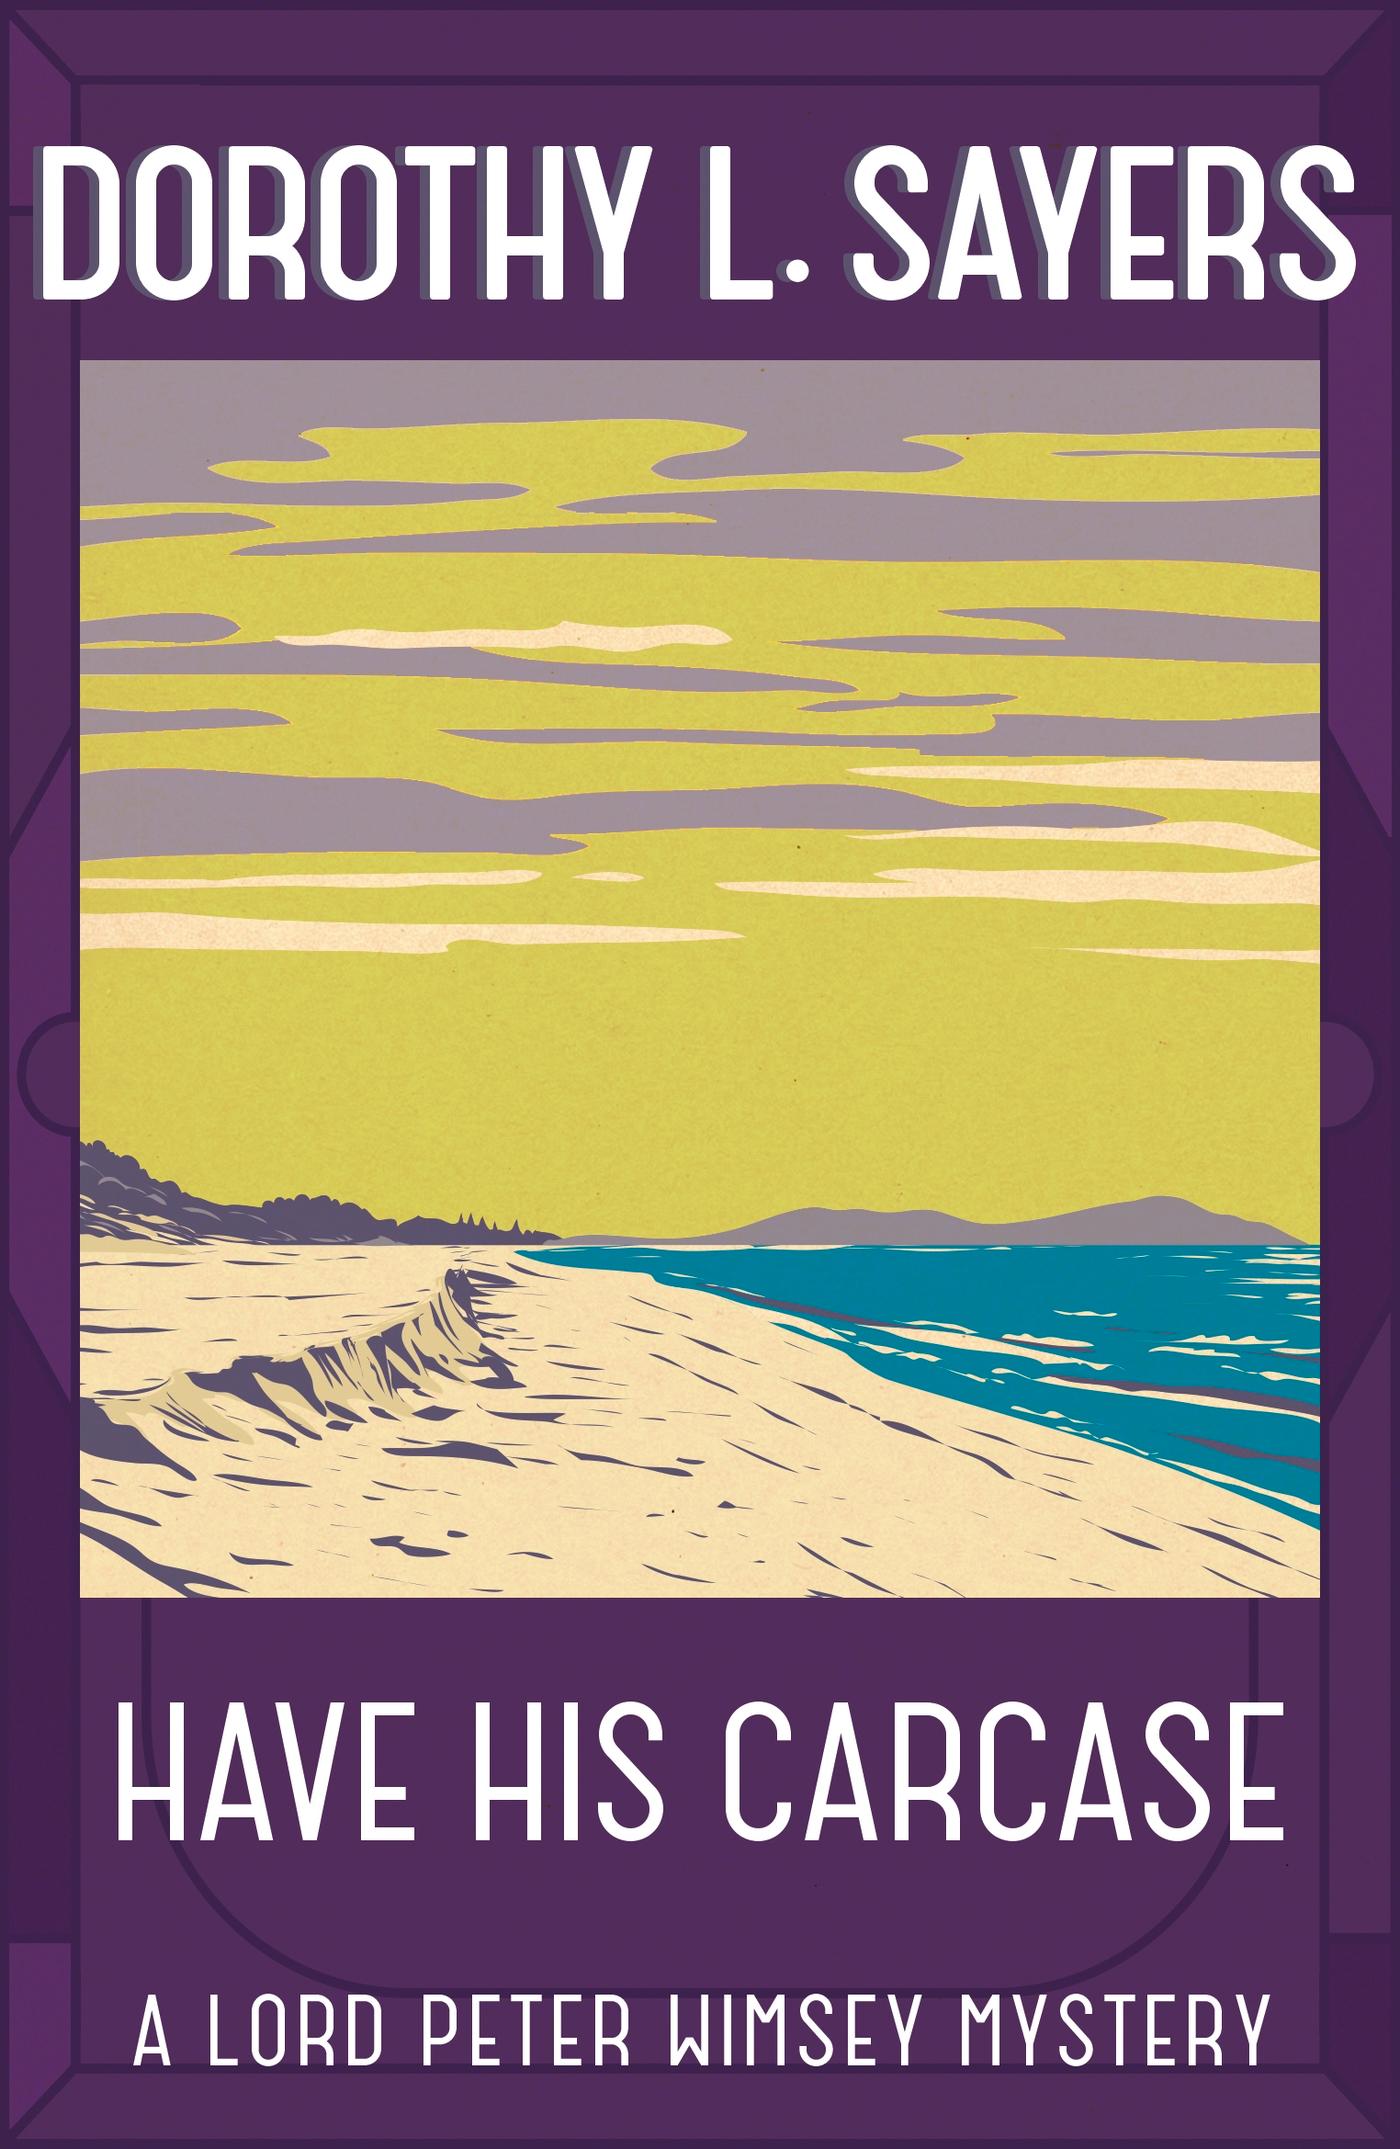 Have His Carcase | The best murder mystery series you'll read in 2022 | Dorothy L Sayers | Taschenbuch | 468 S. | Englisch | 2016 | EAN 9781473621367 - Sayers, Dorothy L